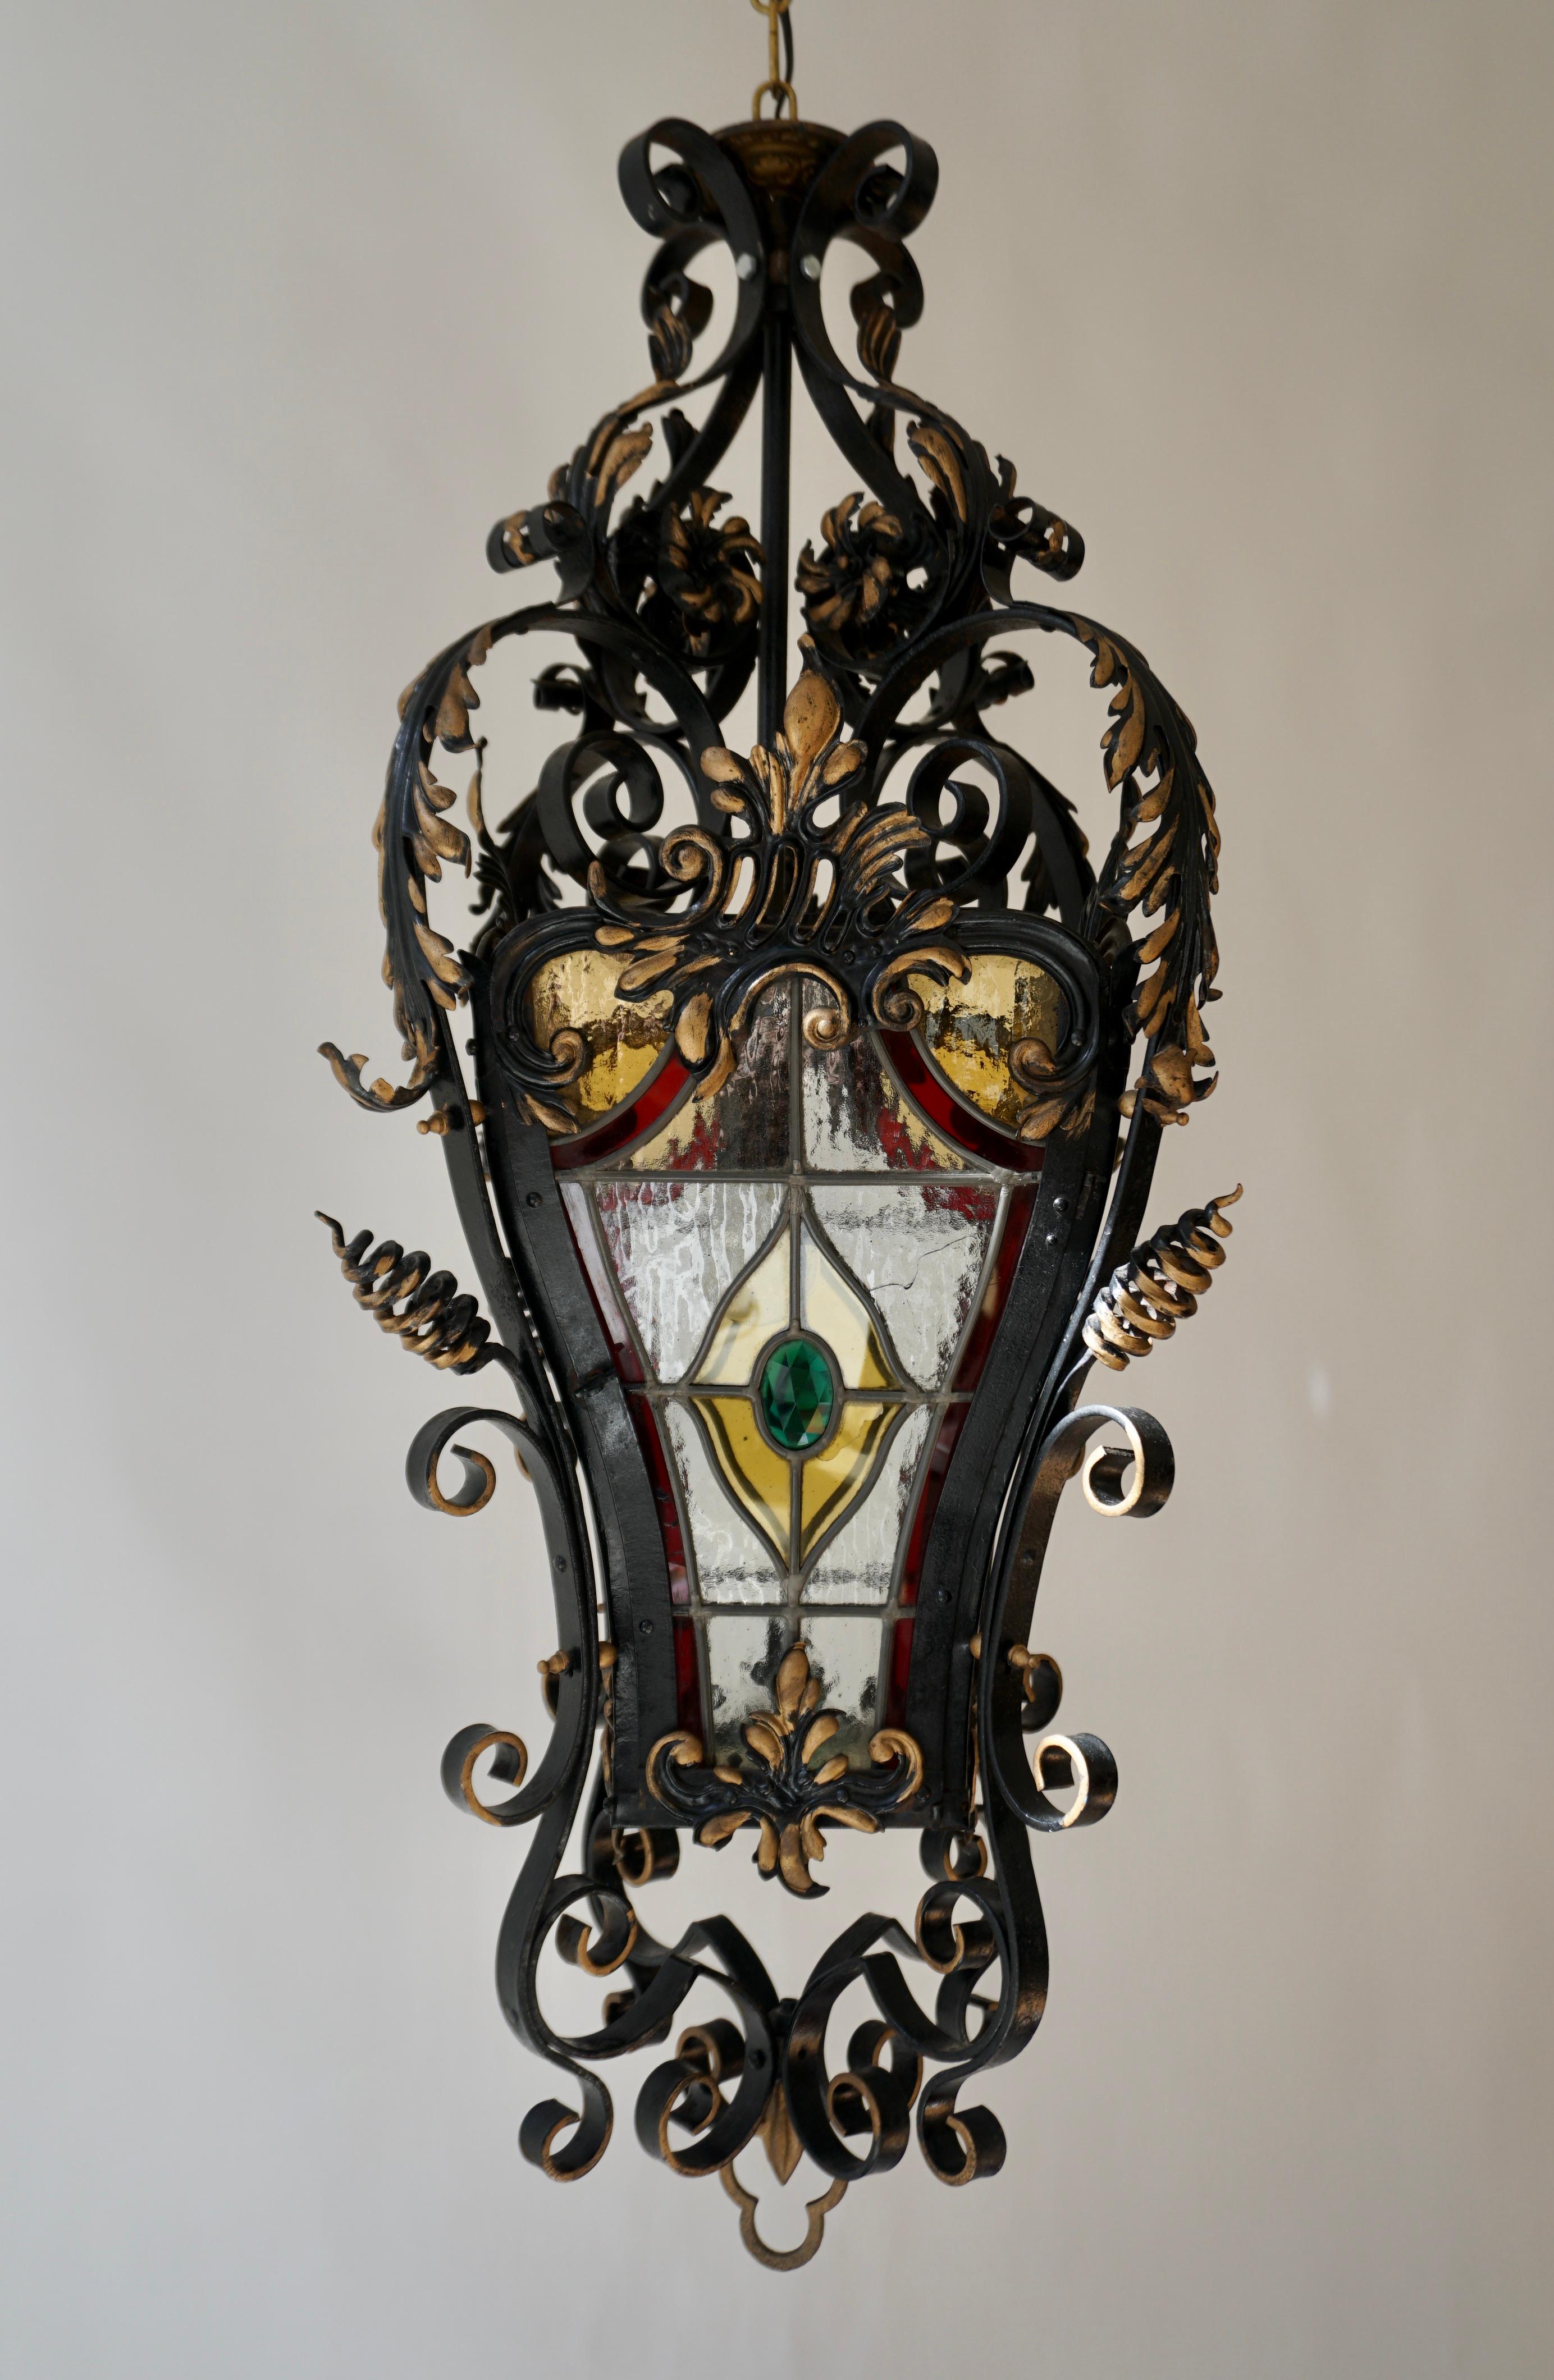  Italian Scrolled Wrought Iron and Stained Glass Hanging Hall Lantern, C. 1900 For Sale 1